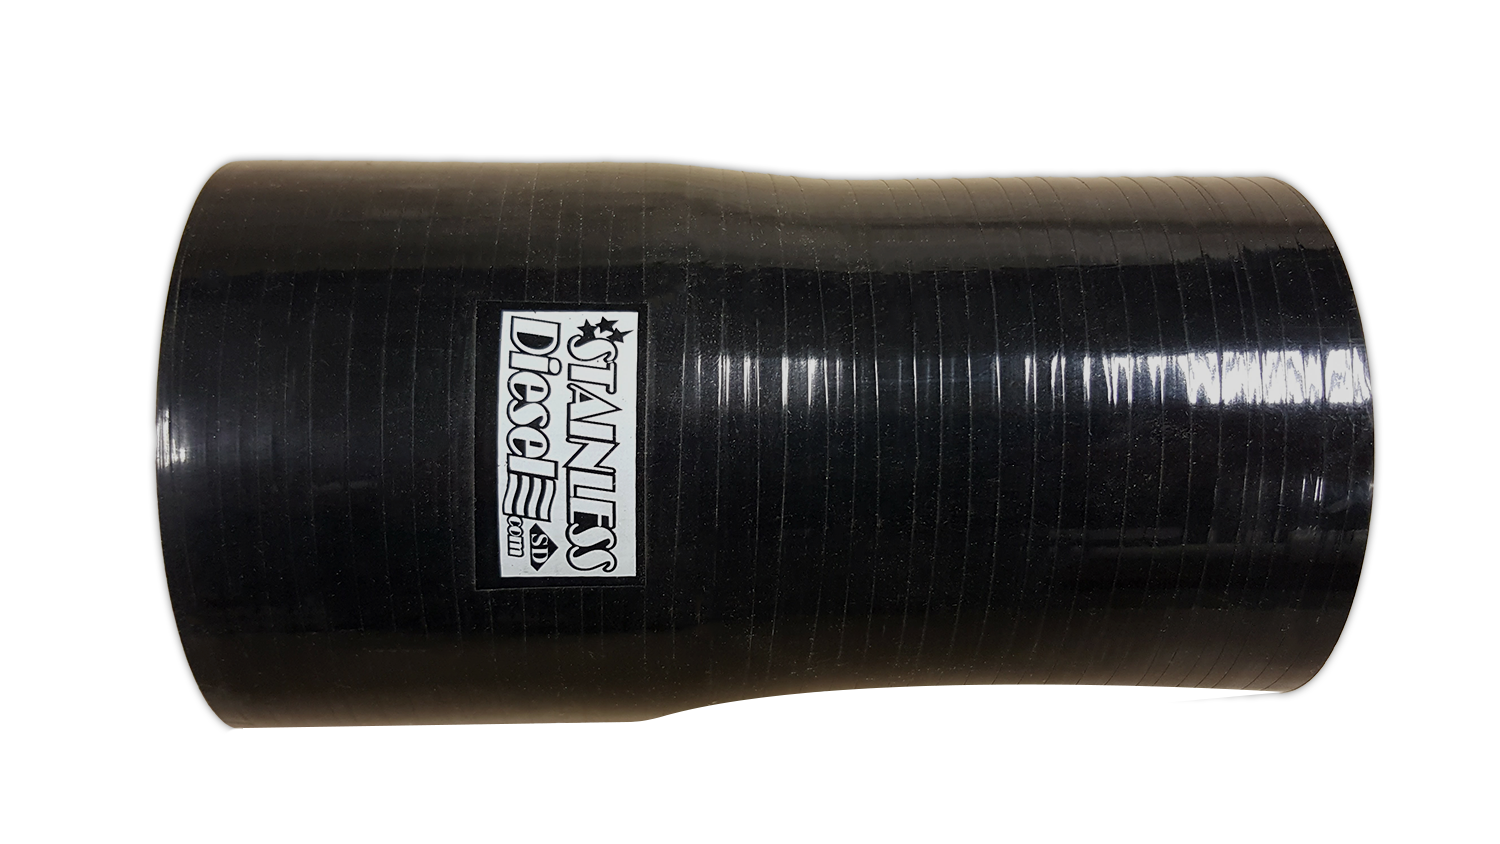 5 ply Black Silicone Hose for high pressure diesel boost